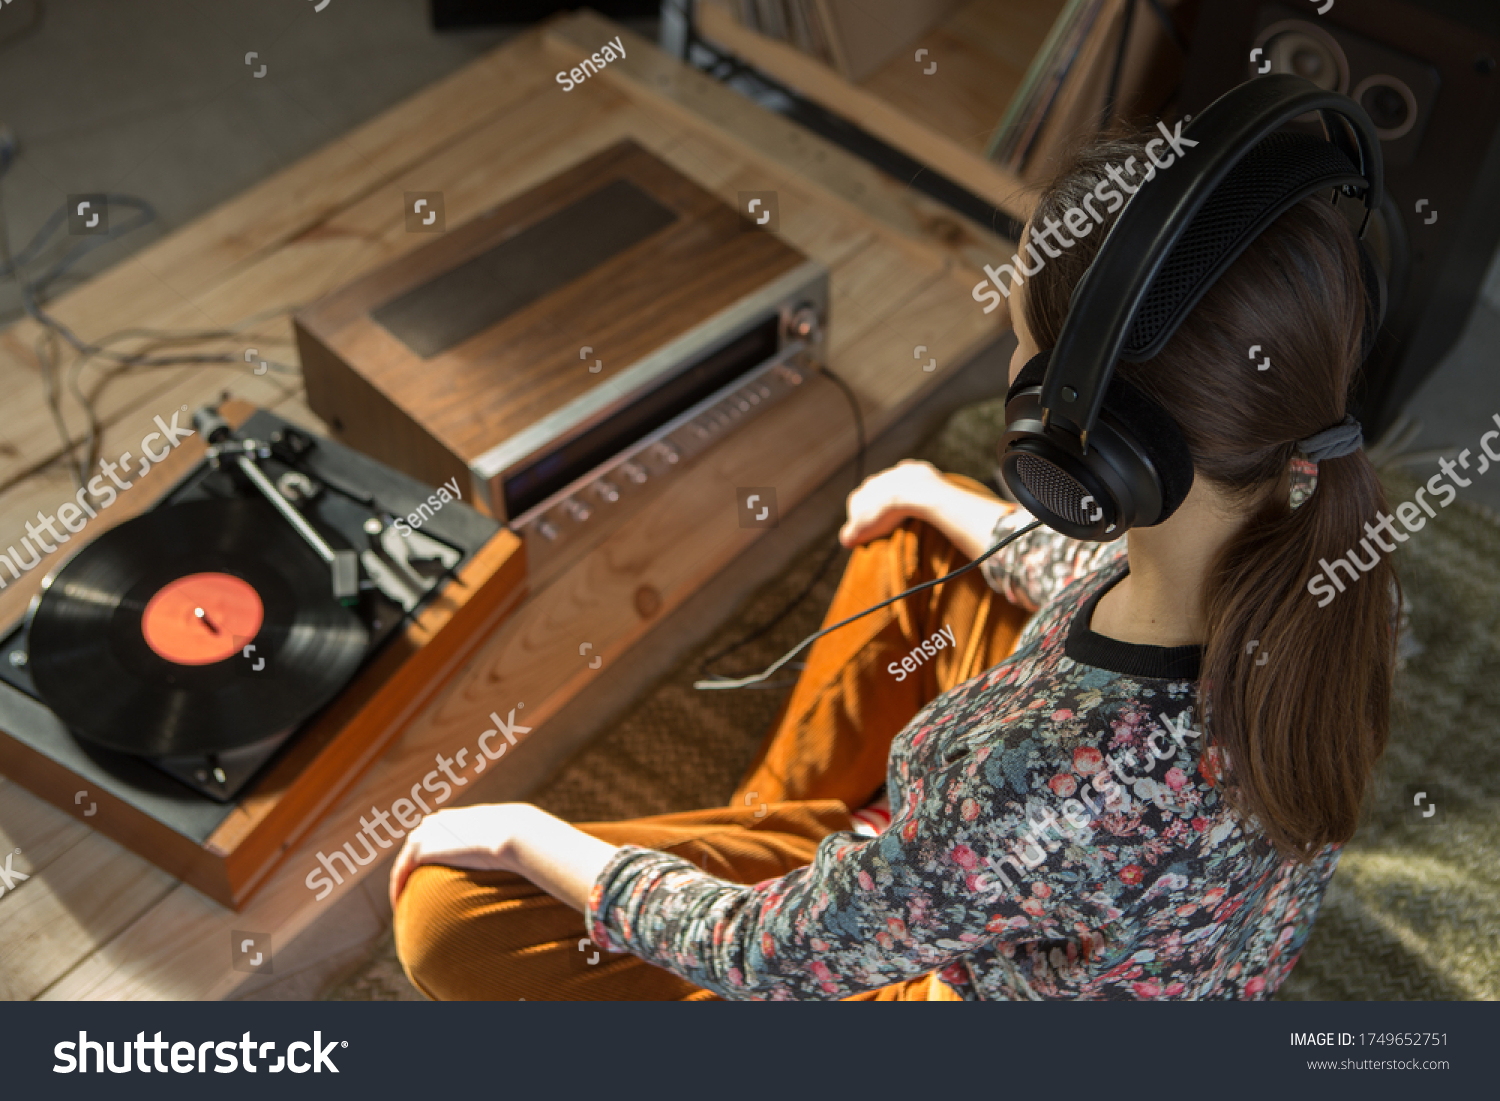 Young Woman listening a music on a HiFi system with turntable, amplifier, headphones and lp vinyl records in a listening room #1749652751